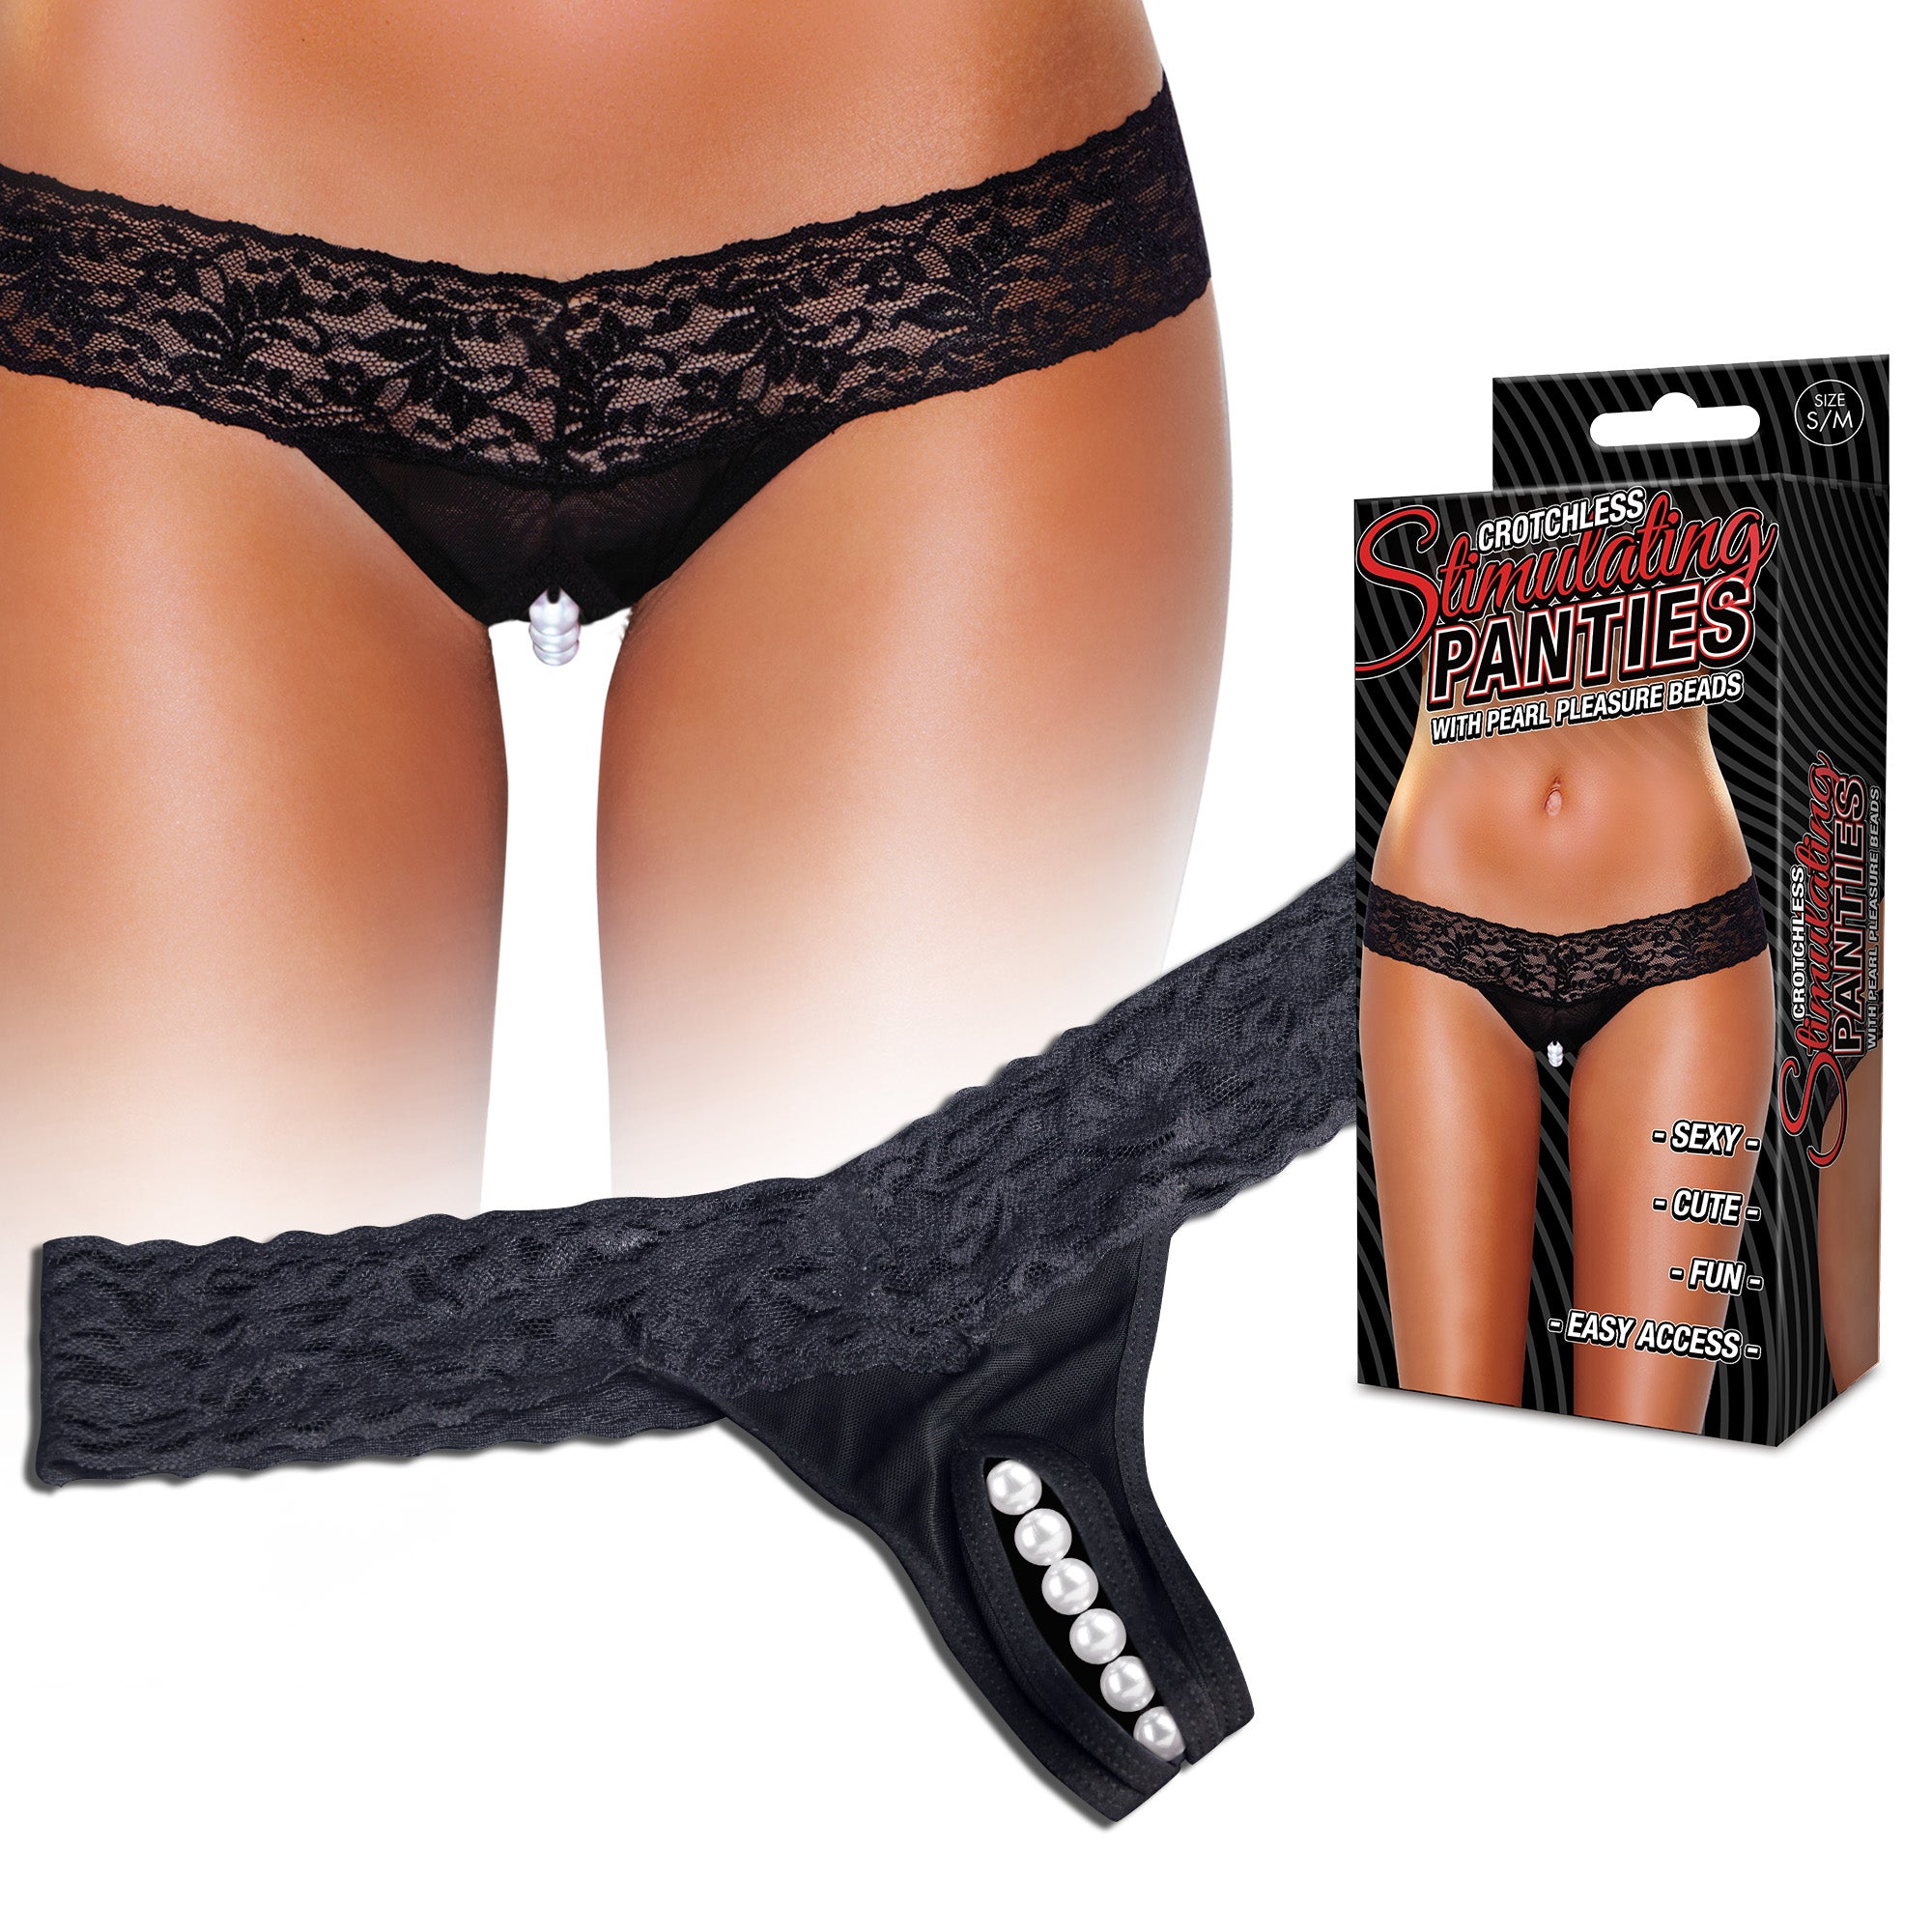 Crotchless Stimulating Panties With Pearl Pleasure Beads - Black